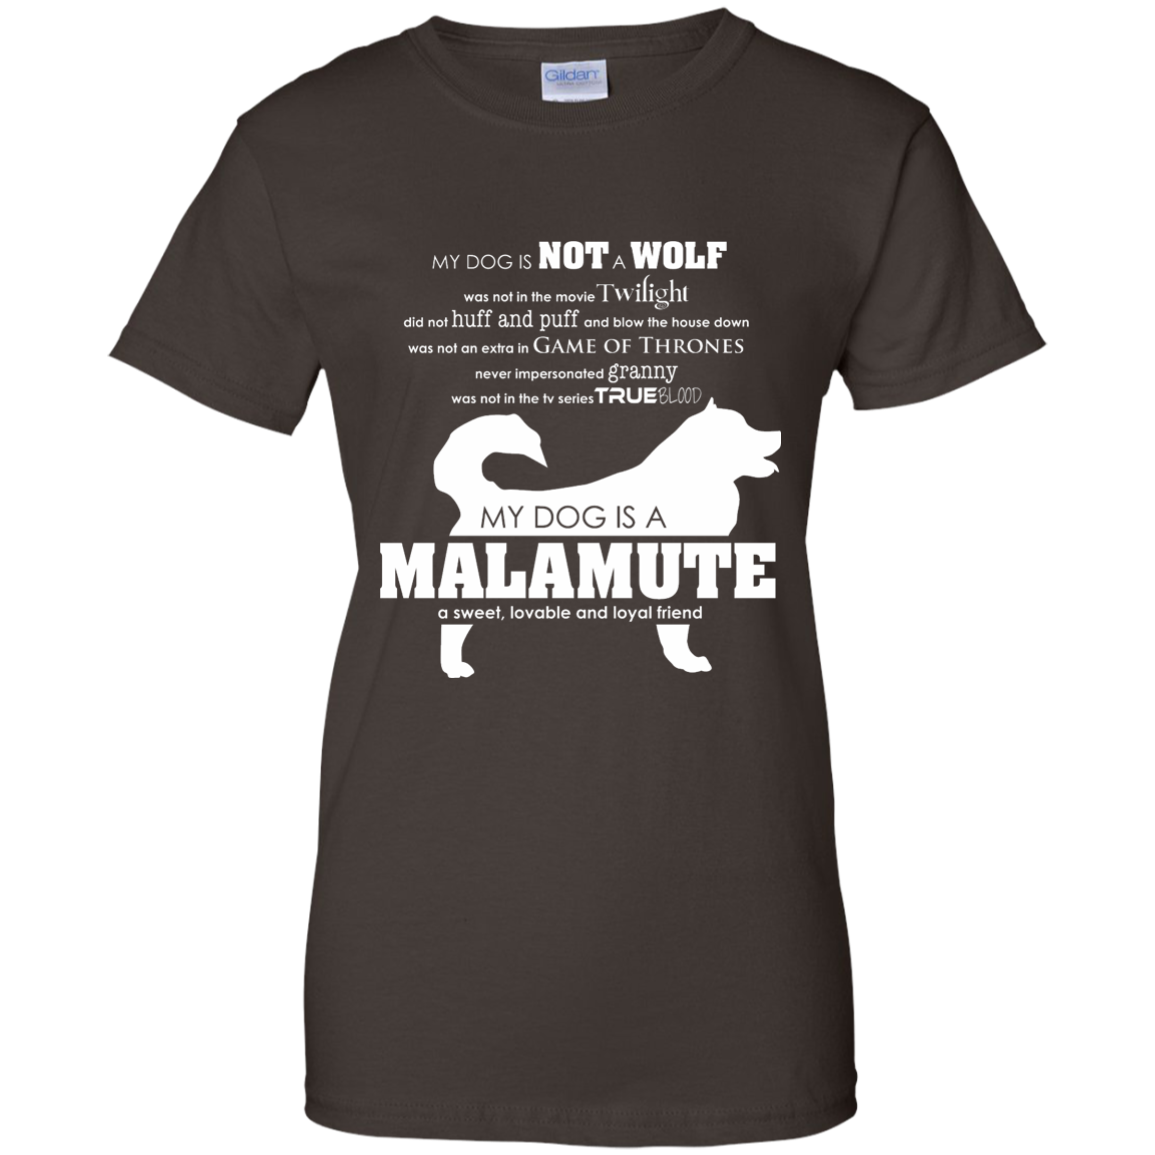 My Dog is Not a Wolf, My Dog is a Malamute - Ladies T-Shirt